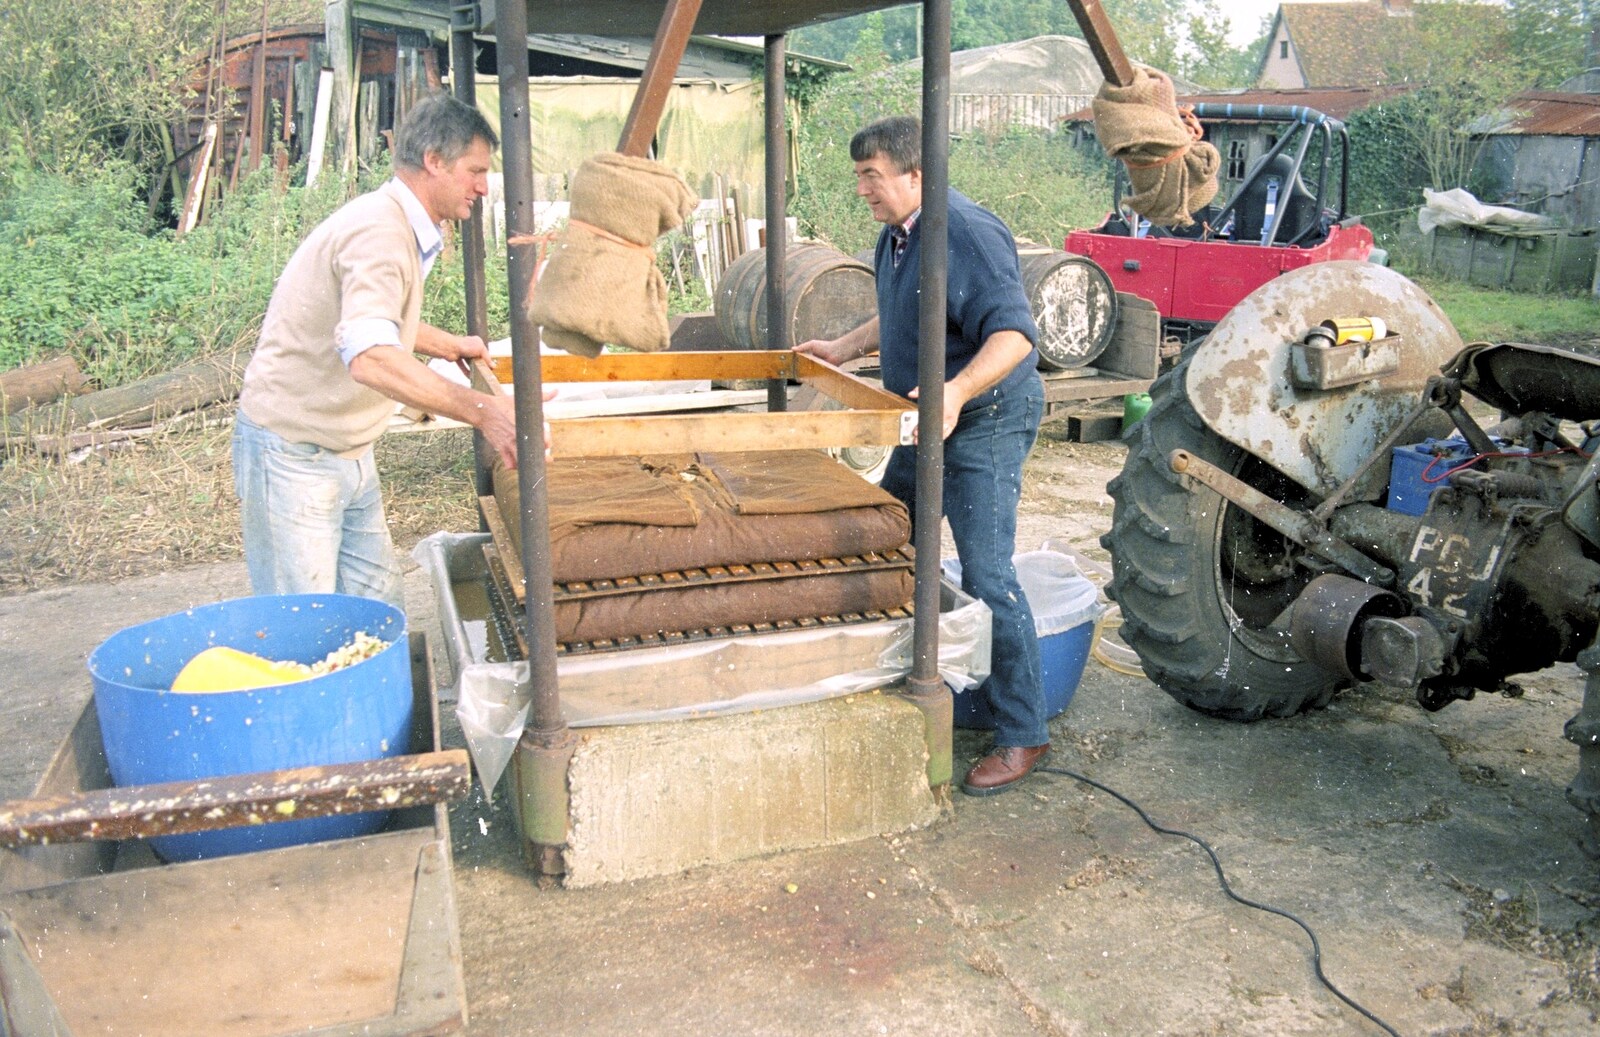 Cider Making (without Rosie), Stuston, Suffolk - 23rd September 1994: Geoff and Corky set up a frame for the next cheese